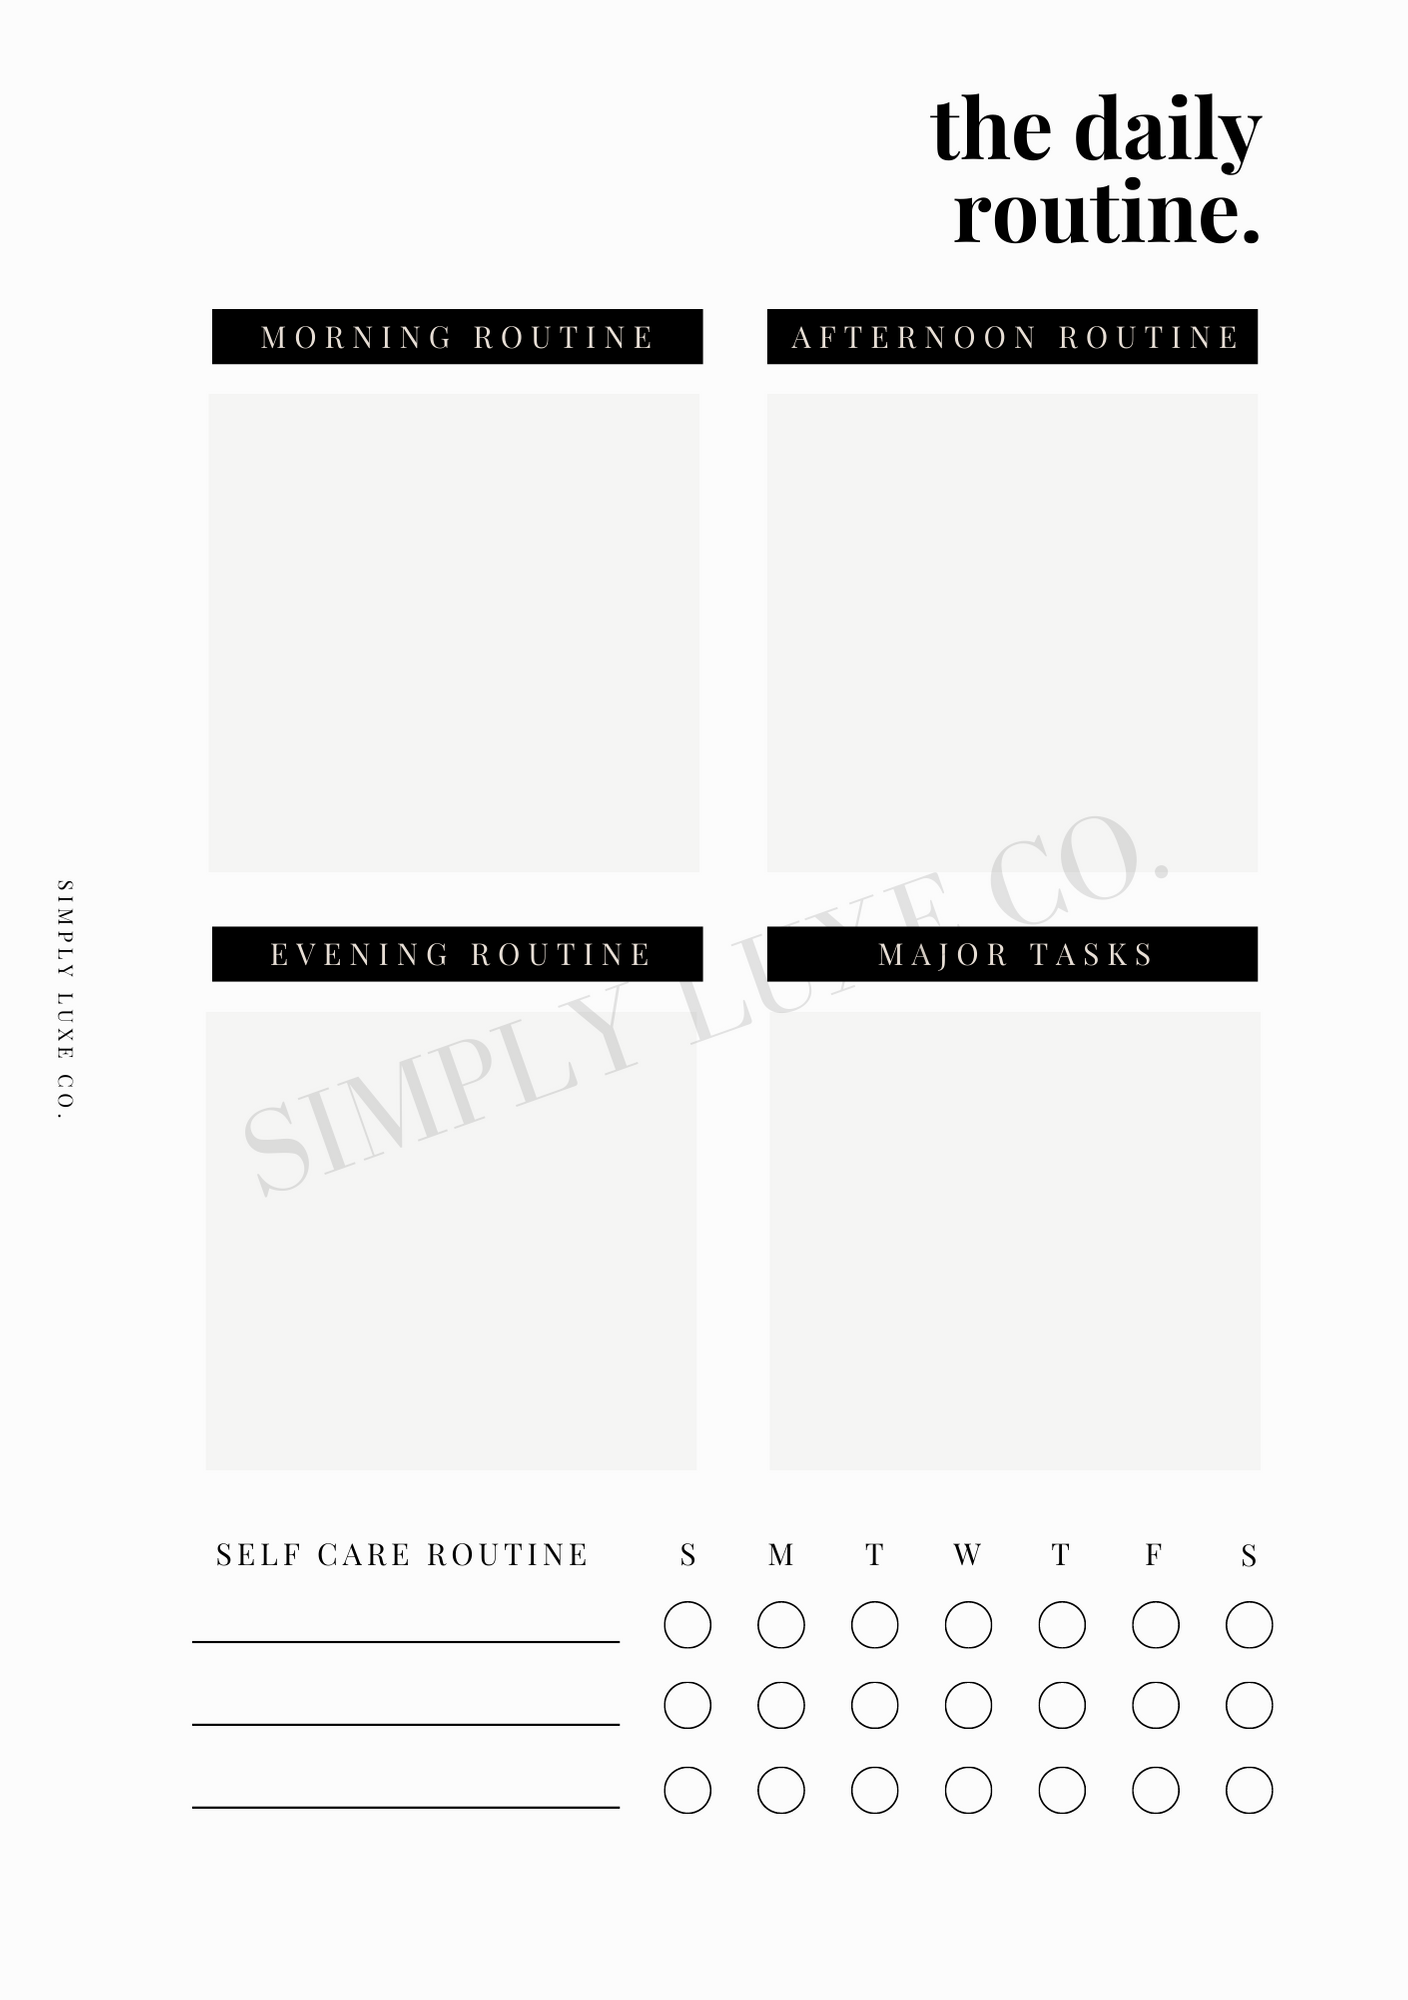 The Daily Routine Printable Inserts - Available in 2 colors